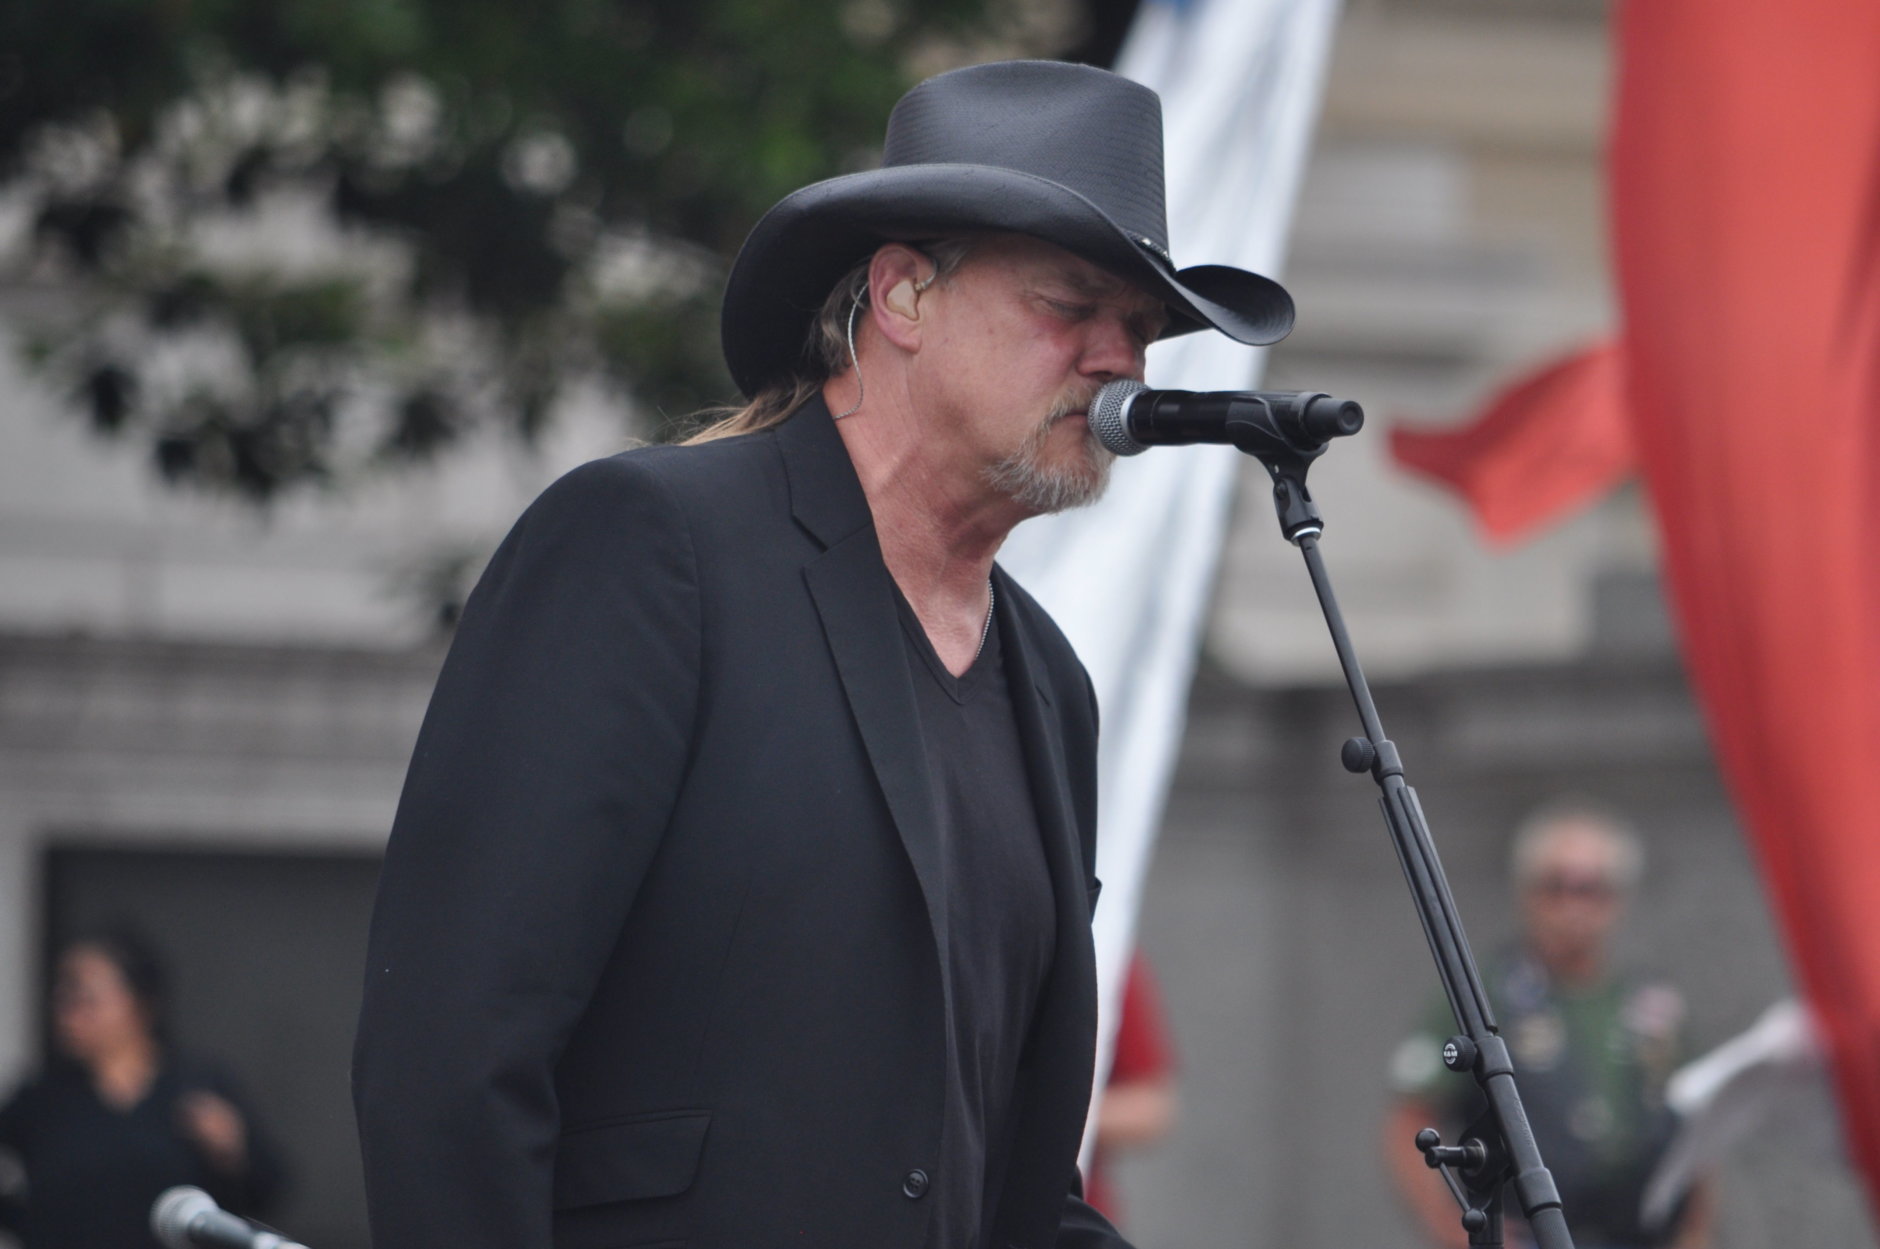 Country singer Trace Adkins is seen performing at the annual National Memorial Day Parade on Monday, May 28, 2018. (Monique Blyther/WTOP)